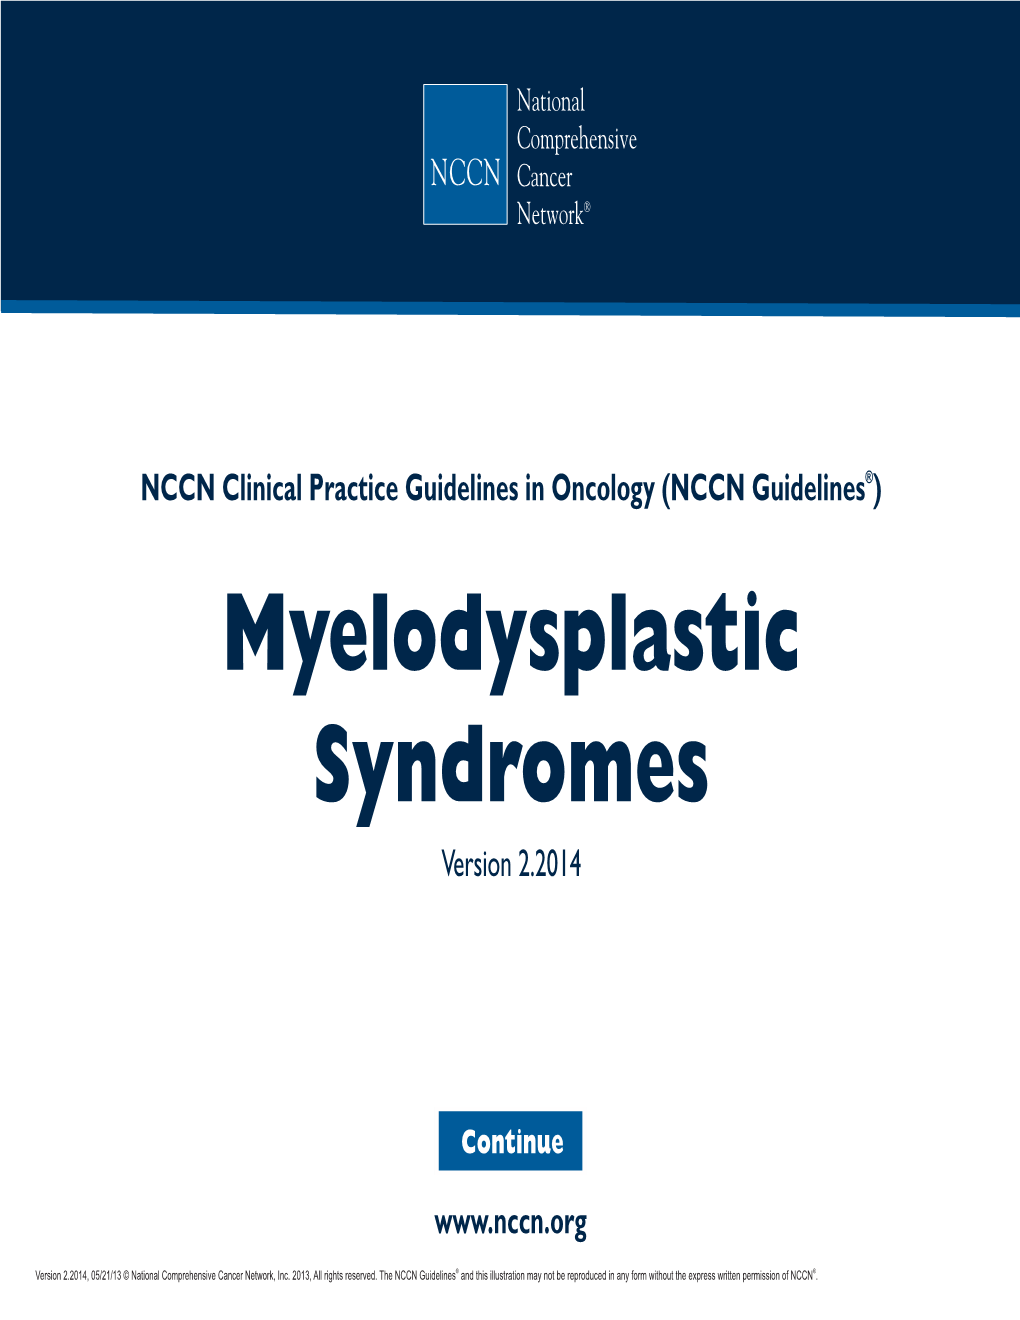 NCCN Clinical Practice Guidelines in Oncology (NCCN Guidelines® ) Myelodysplastic Syndromes Version 2.2014